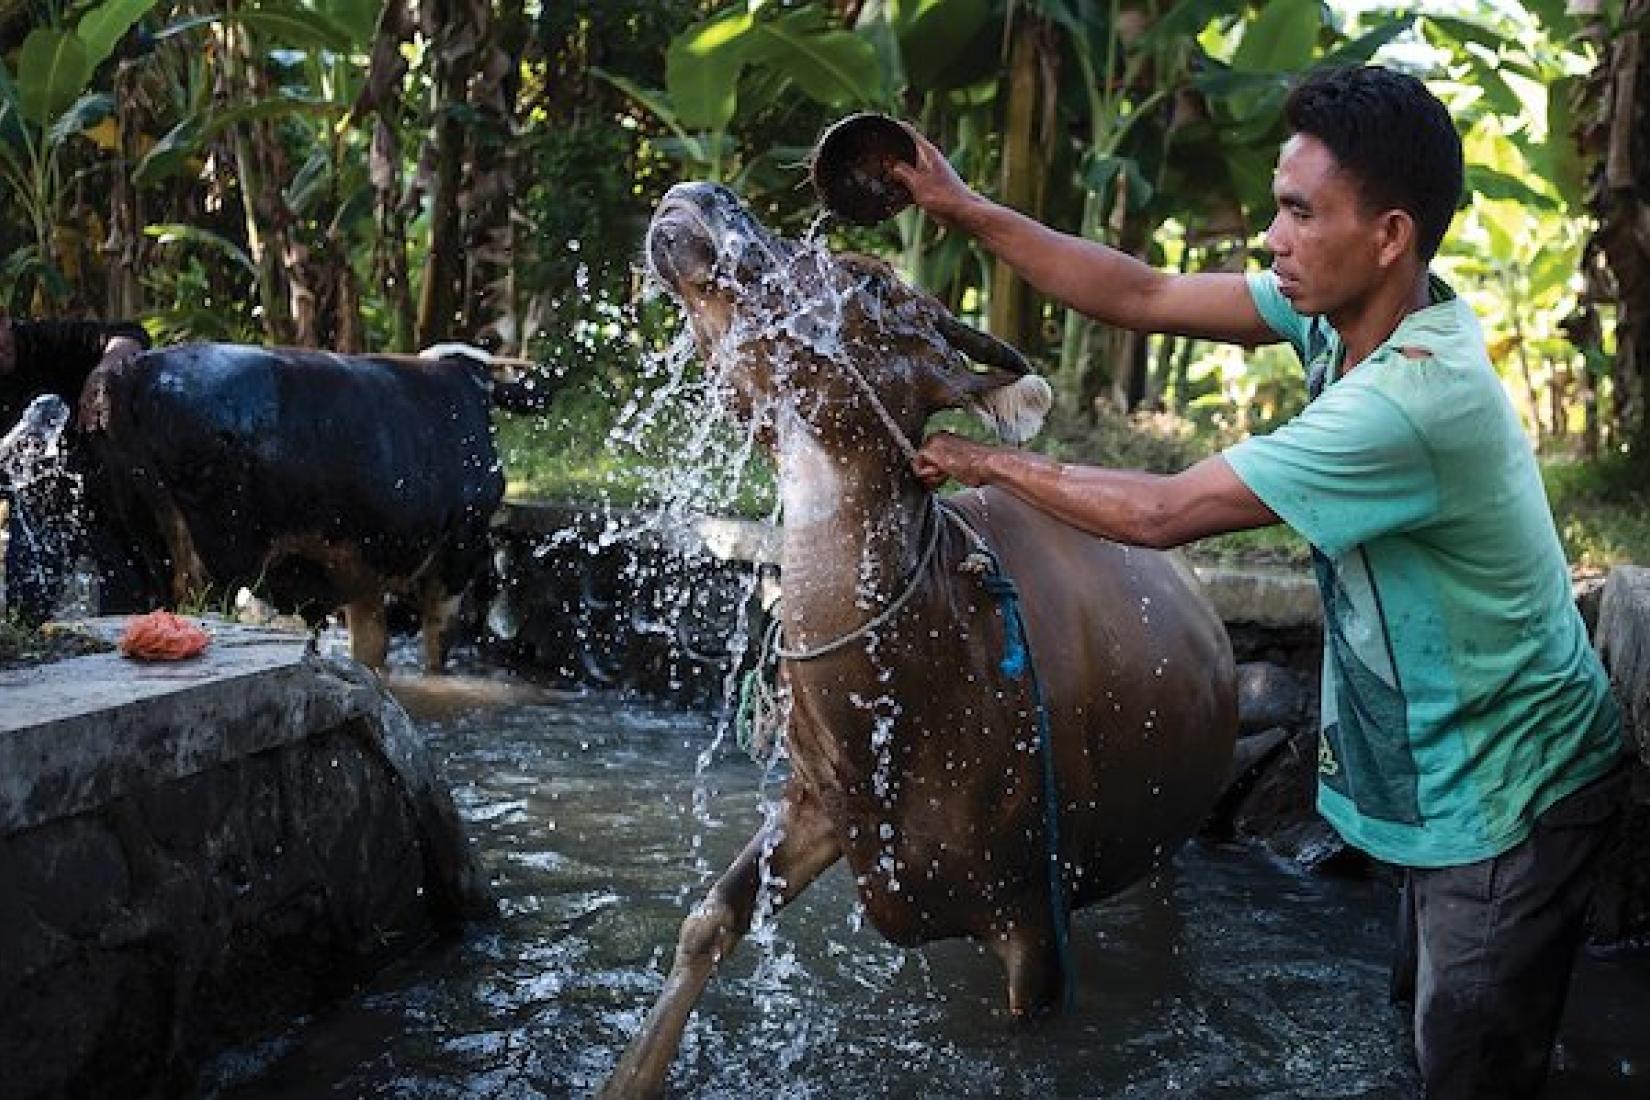 Hardiyanto the treasurer of the cattle group in Karang Kendal Hamlet in Indonesia washes one of his cows. Image: ACIAR/Conor Ashleigh